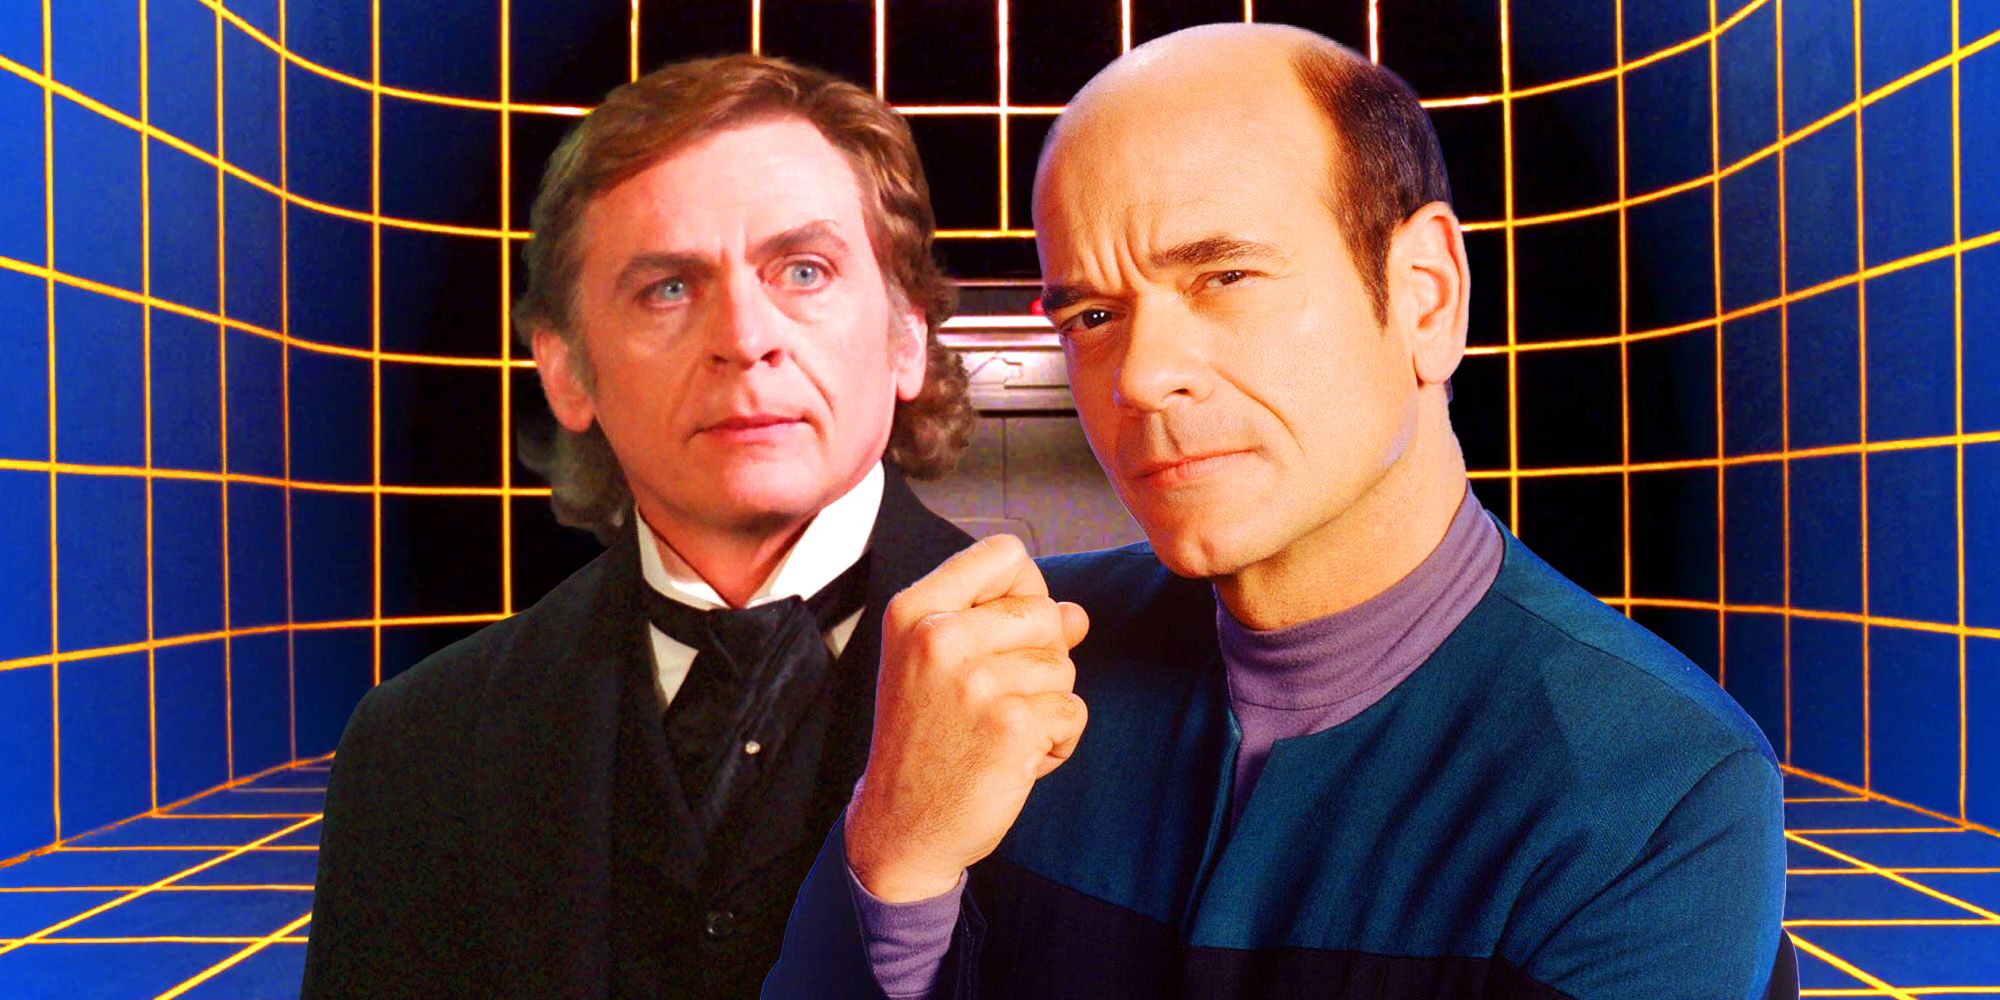 The Doctor and Professor James Moriarty from Star Trek